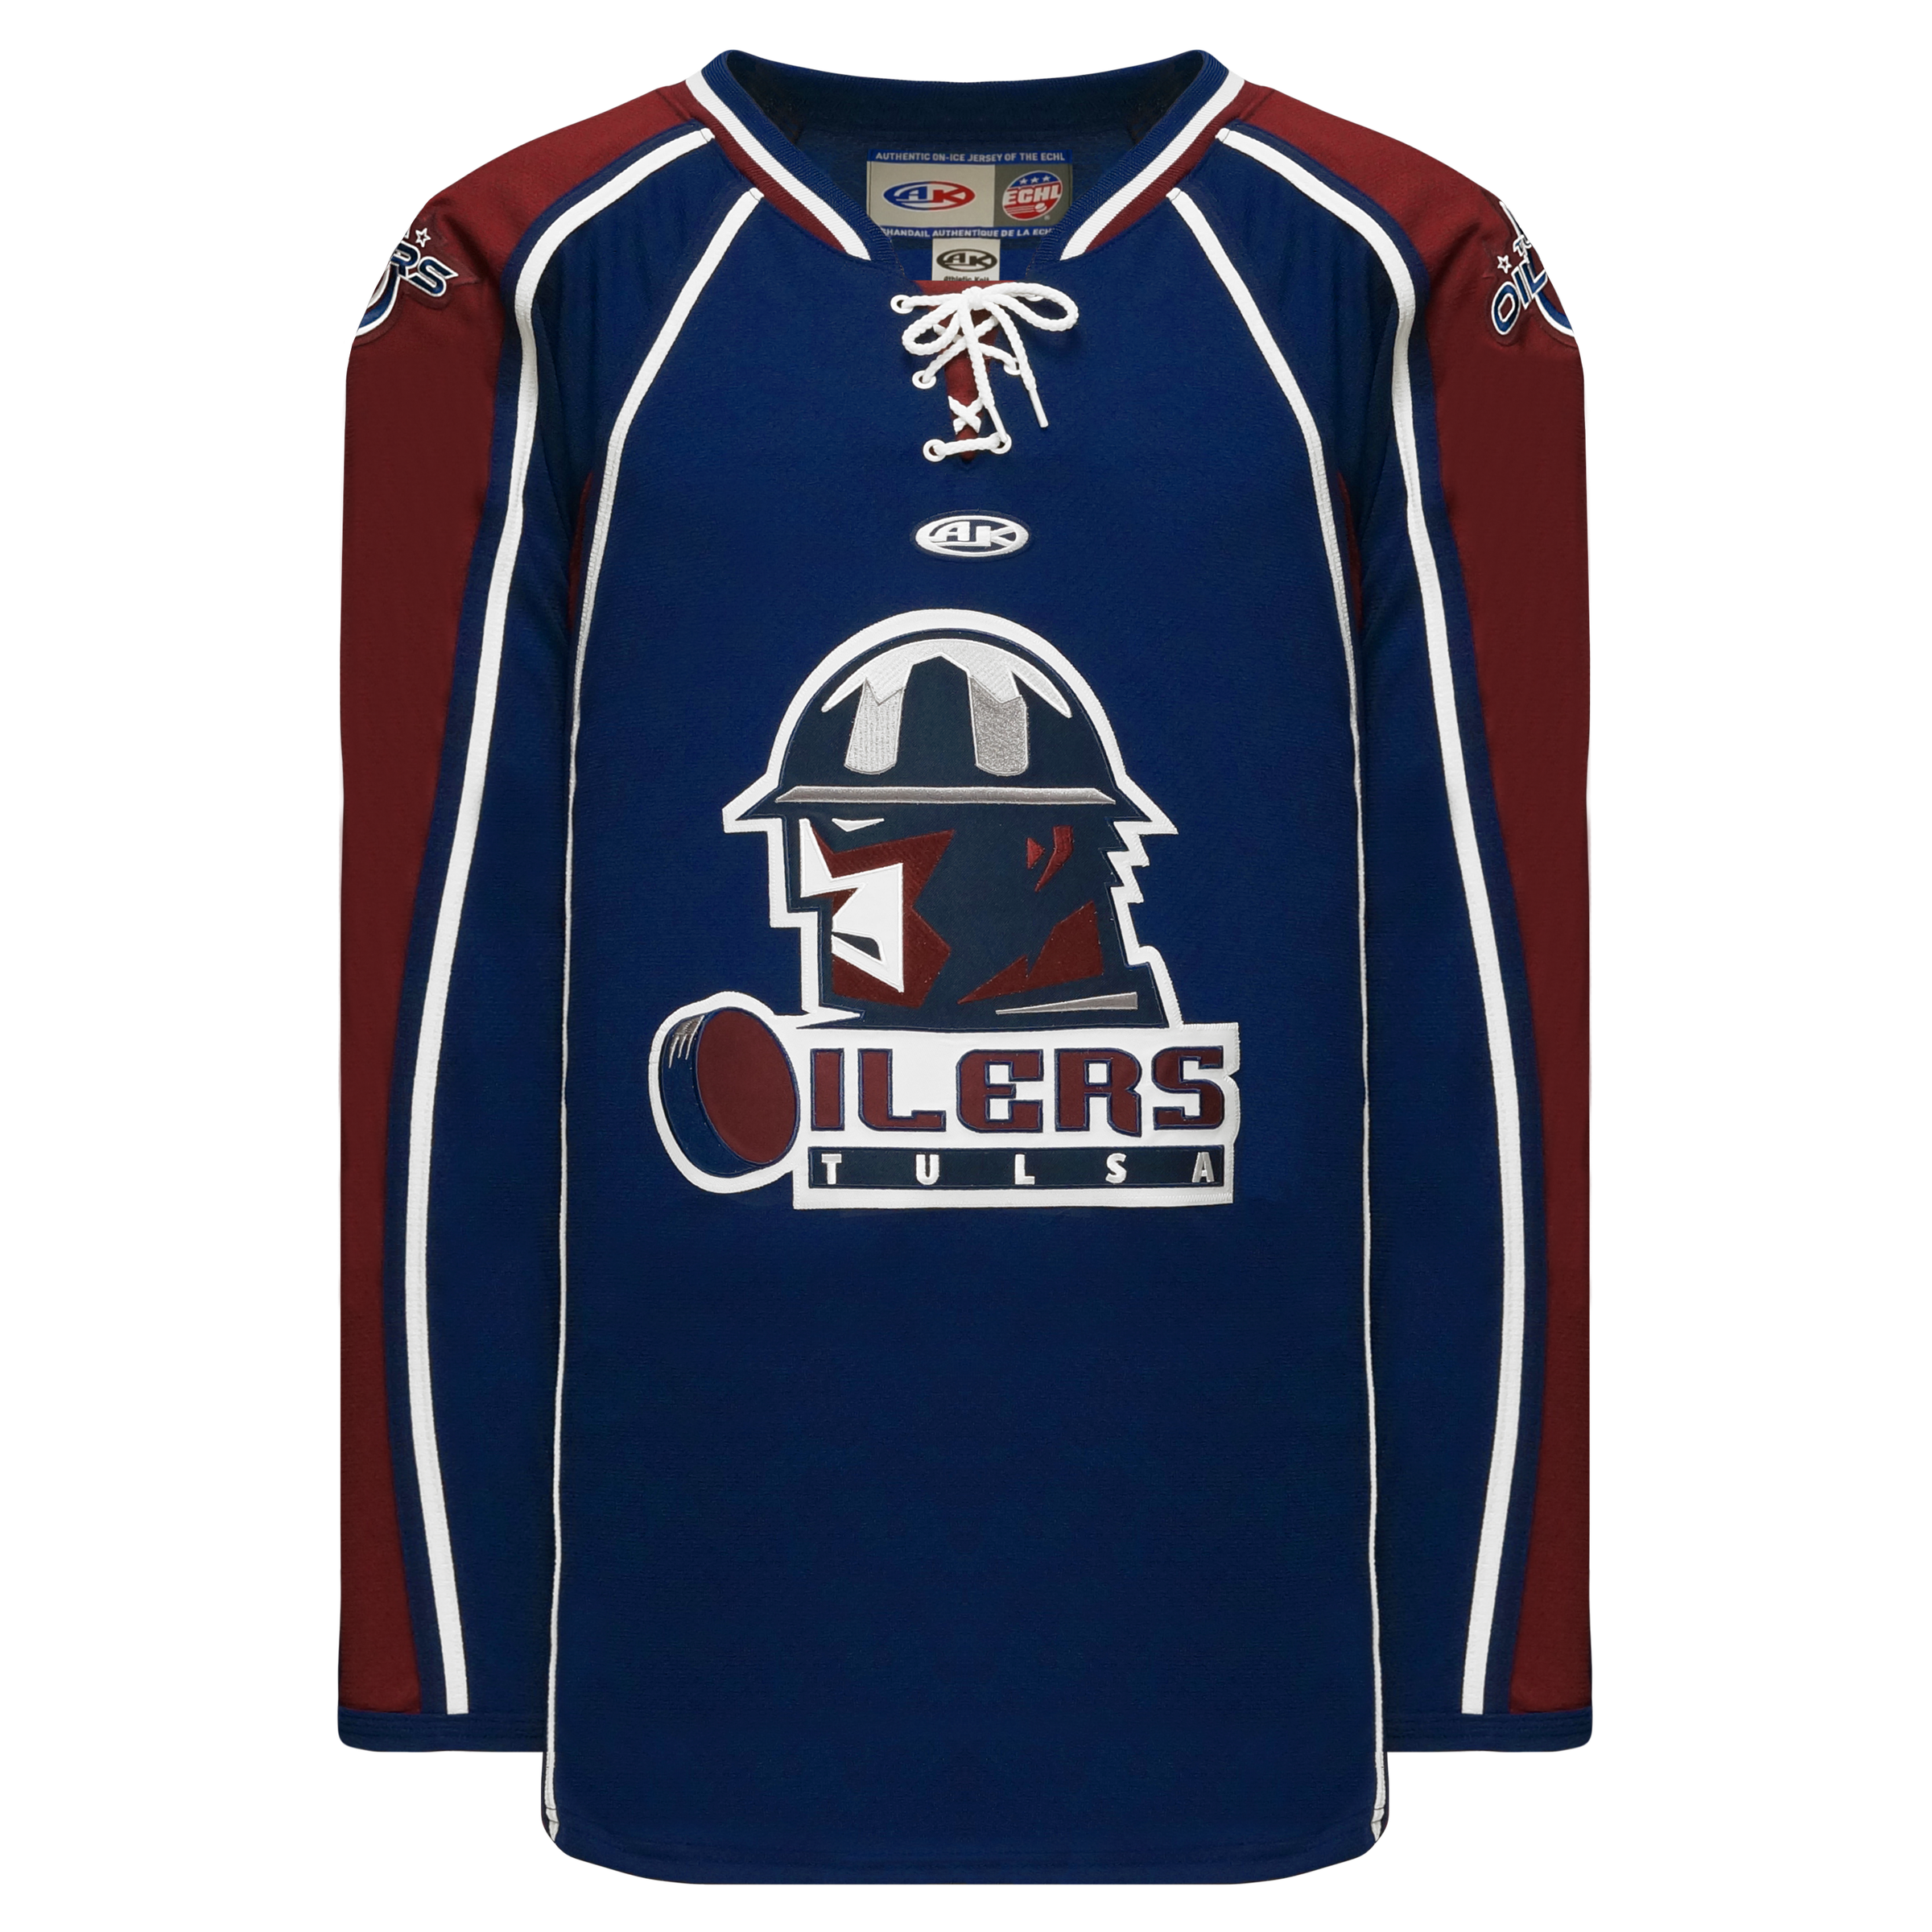 Tulsa Oilers are at home again this week and it will be youth jersey night!